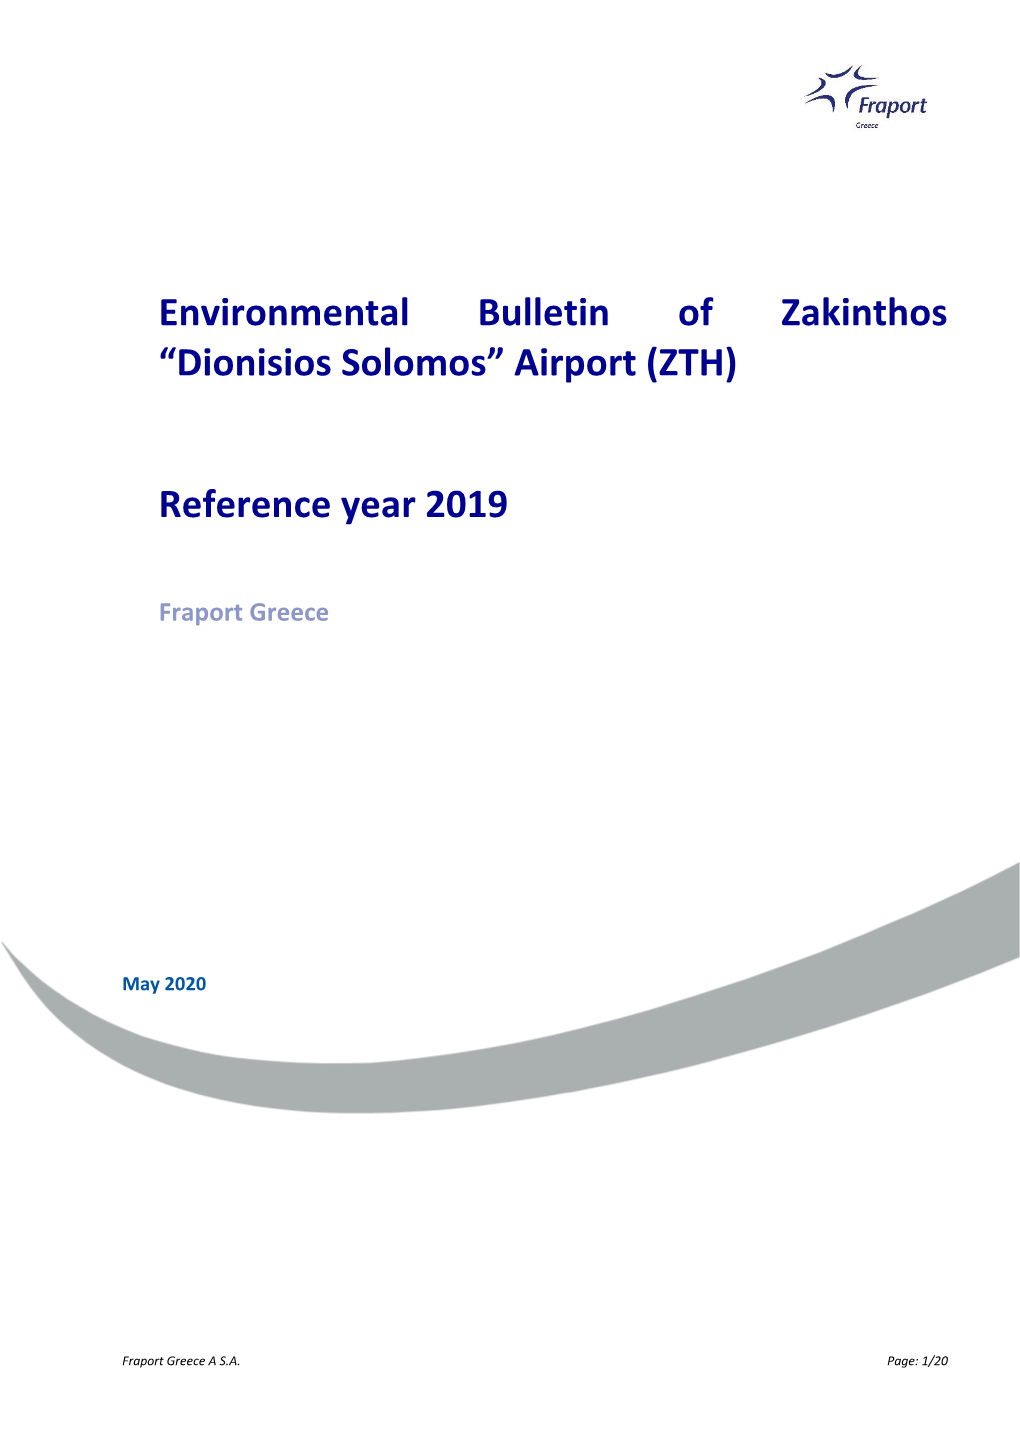 Environmental Bulletin of Zakinthos “Dionisios Solomos” Airport (ZTH) Reference Year 2019